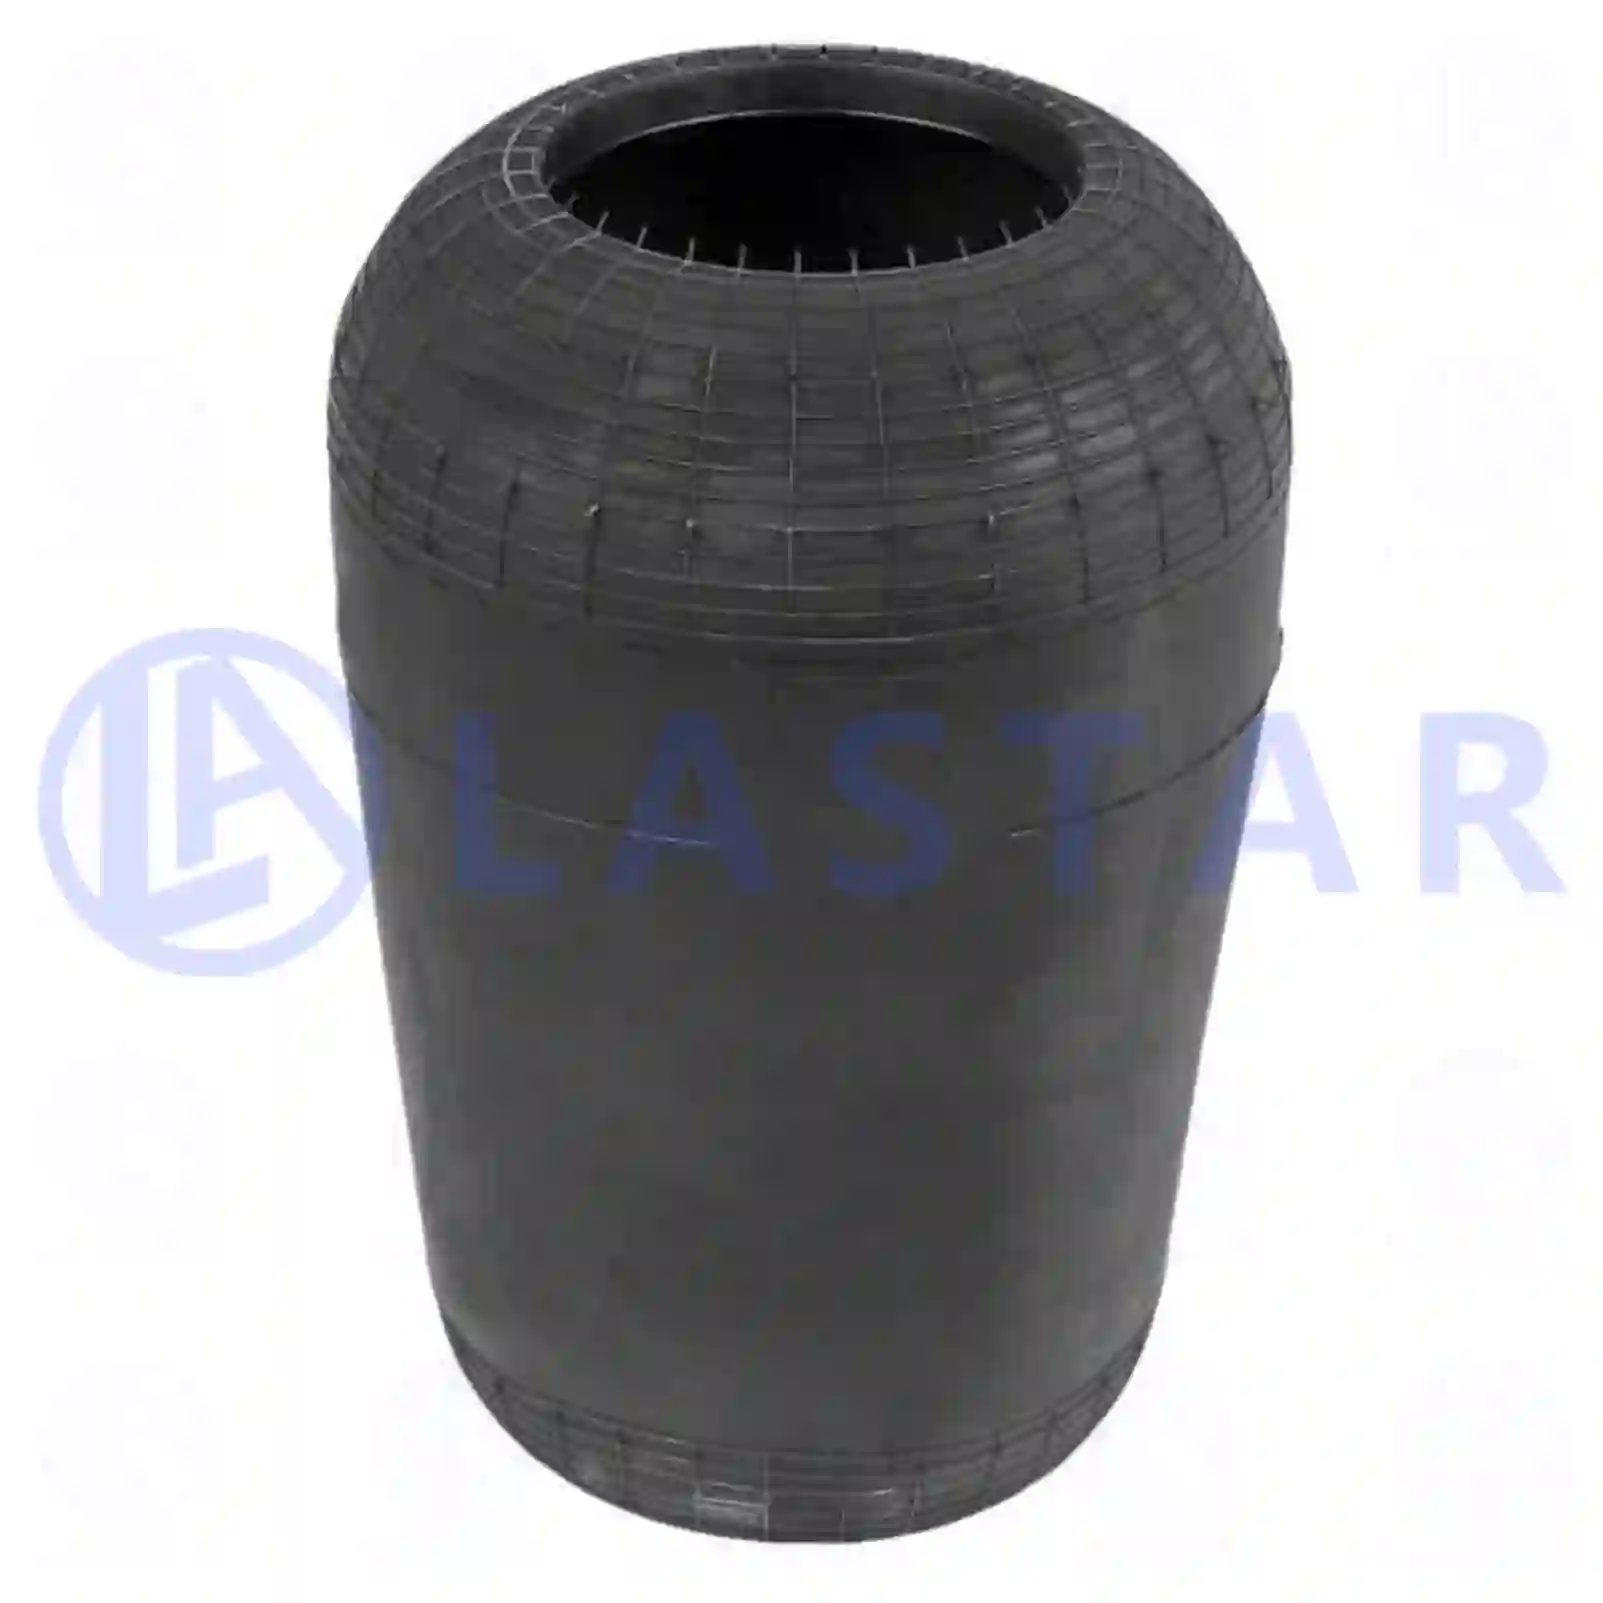 Air spring, without piston, 77727047, 0627584, 627584, 02491566, 81436010129, 81436010136, 178623, 325993, 3833270001, 383327000110, 6213280001, 0627584, 627584, 1611776, ZG40813-0008 ||  77727047 Lastar Spare Part | Truck Spare Parts, Auotomotive Spare Parts Air spring, without piston, 77727047, 0627584, 627584, 02491566, 81436010129, 81436010136, 178623, 325993, 3833270001, 383327000110, 6213280001, 0627584, 627584, 1611776, ZG40813-0008 ||  77727047 Lastar Spare Part | Truck Spare Parts, Auotomotive Spare Parts